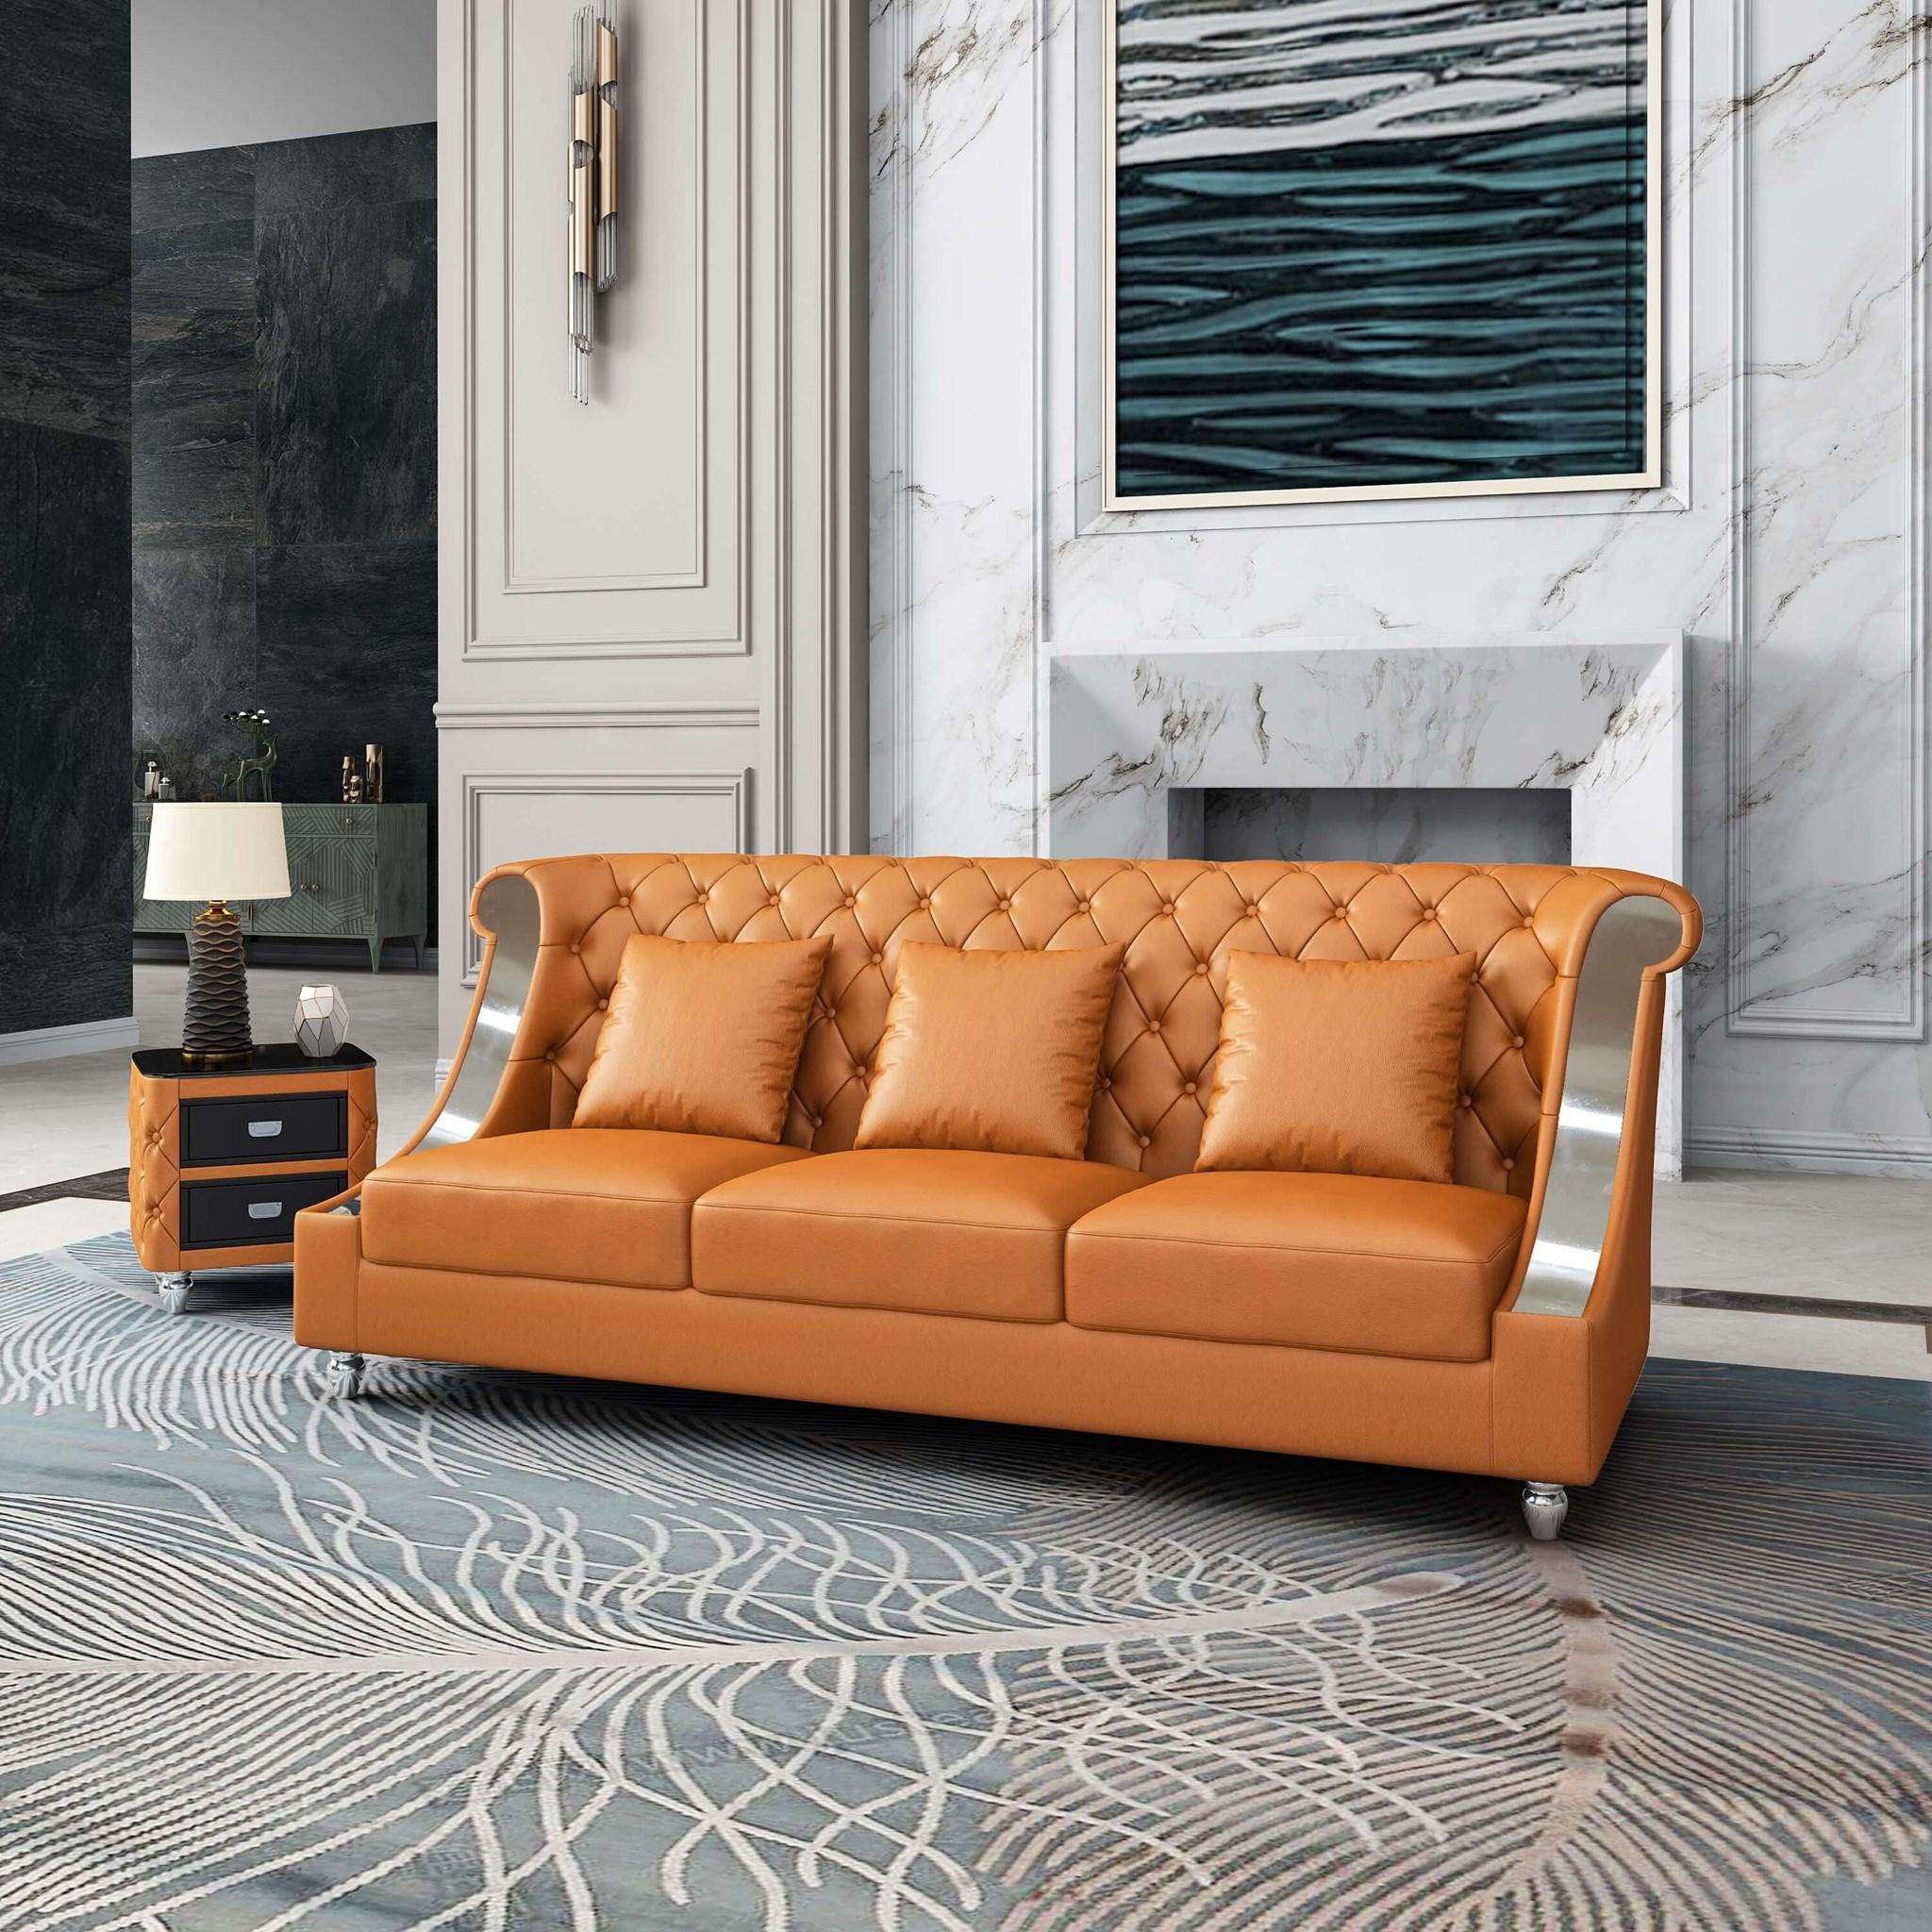 Contemporary, Modern Sofa MAYFAIR EF-90282-S in Cognac Leather